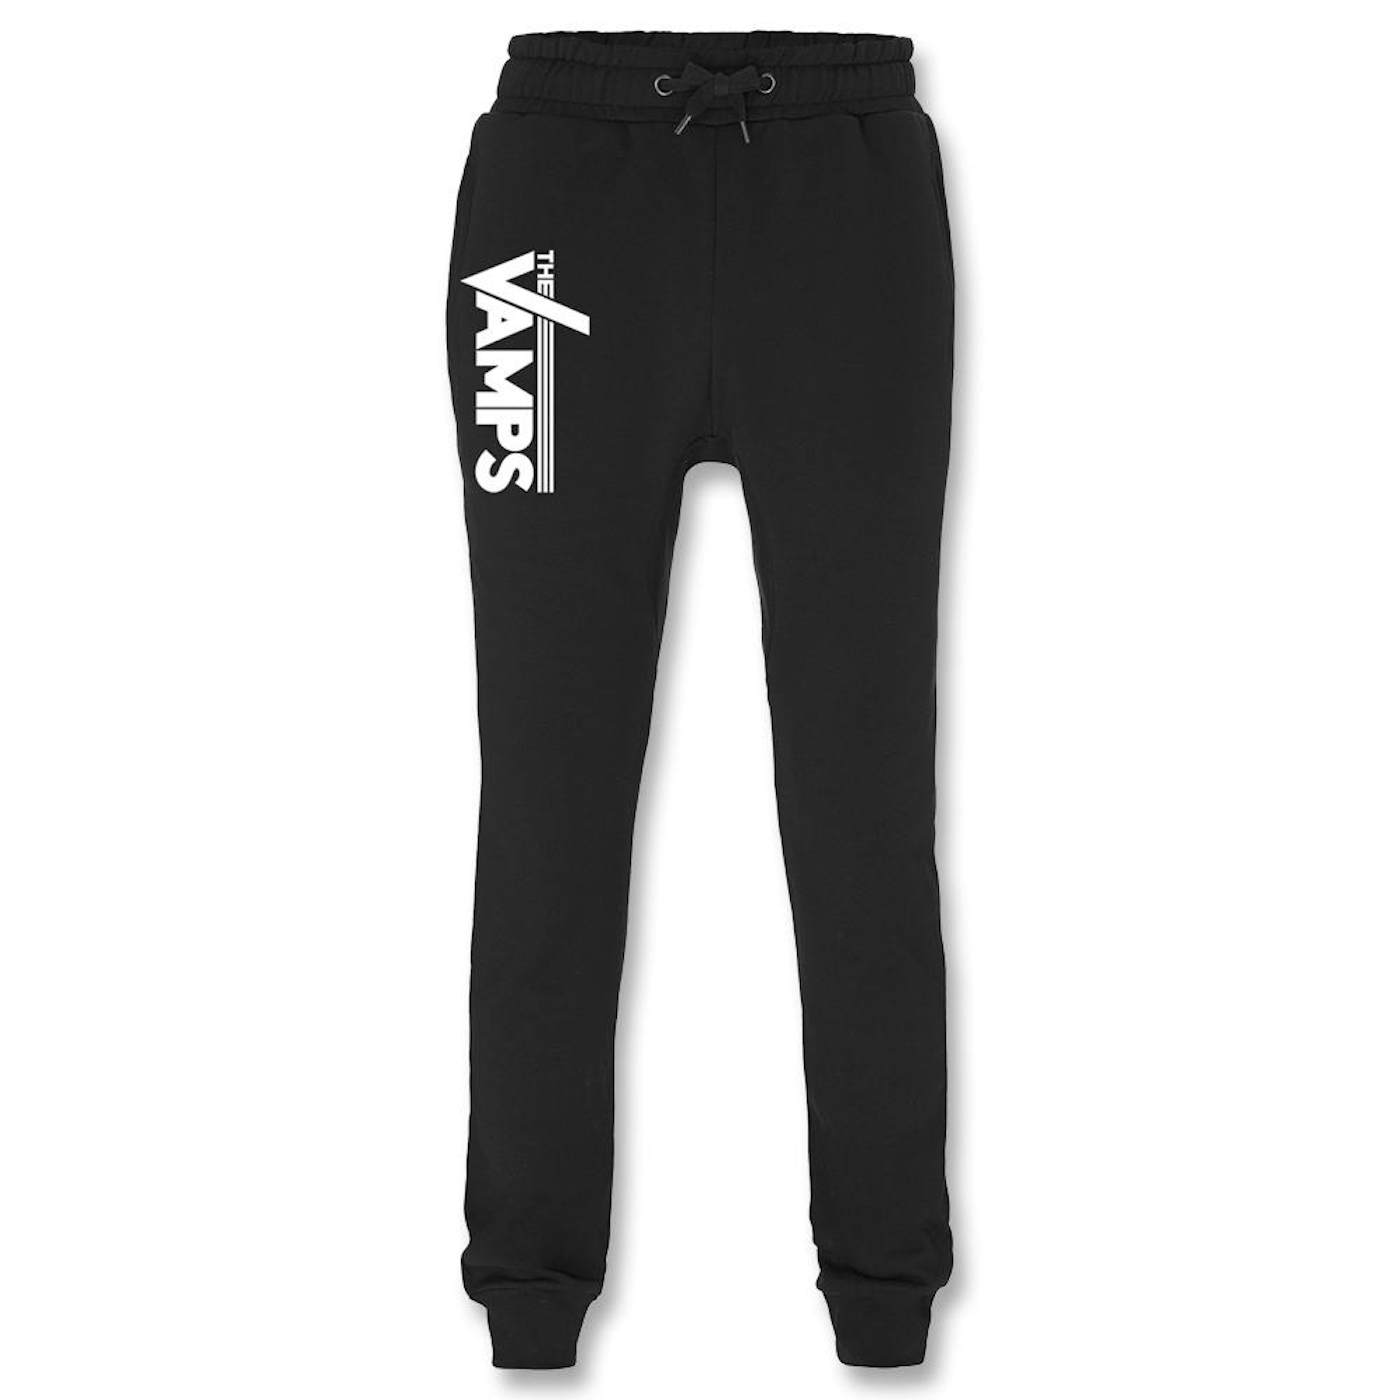 The Vamps Logo Joggers